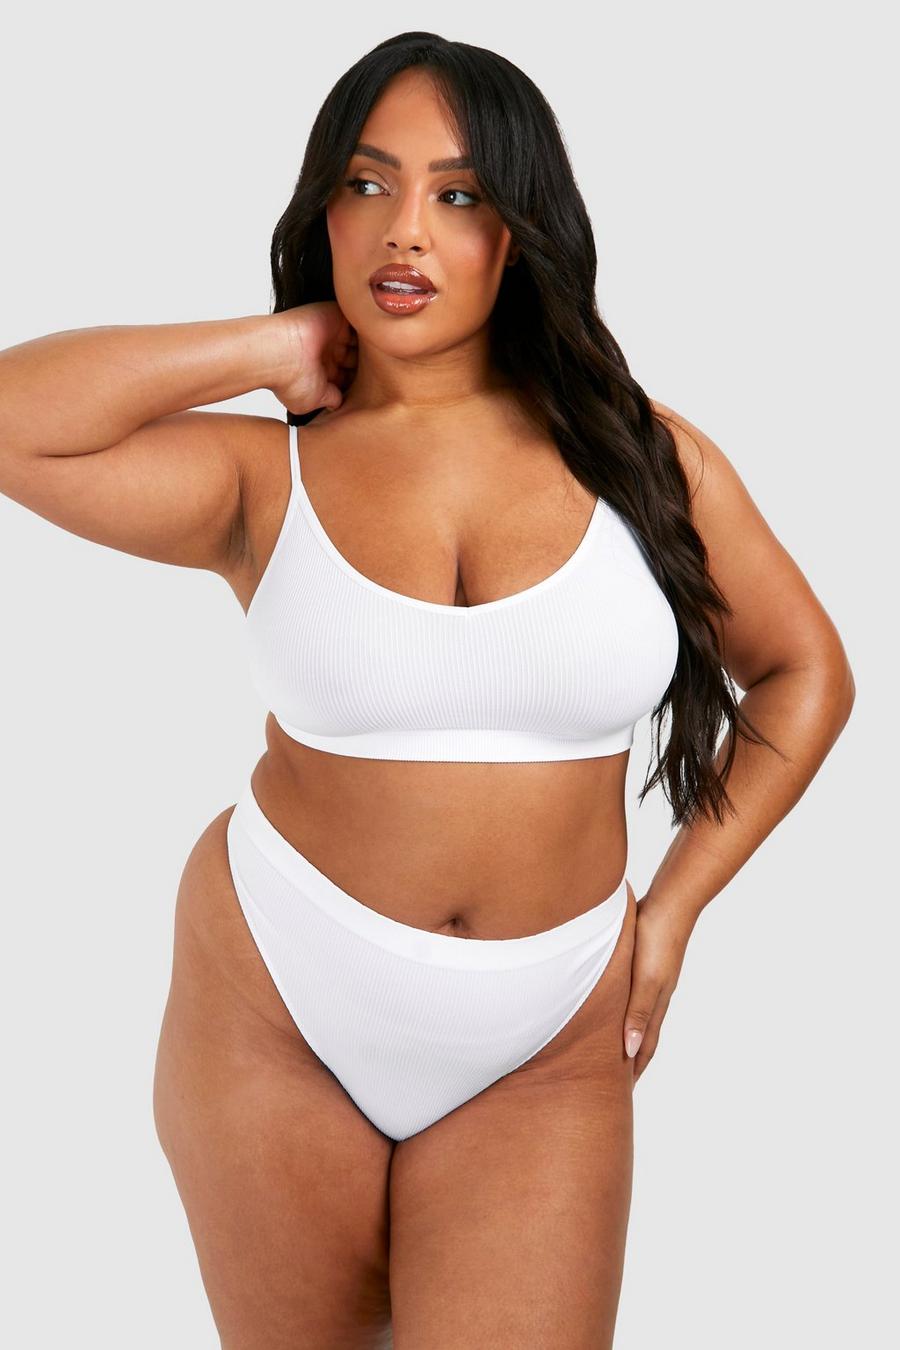 Deals of The Day! Pisexur Women's Sexy Lingerie Set Plus Size Sexy